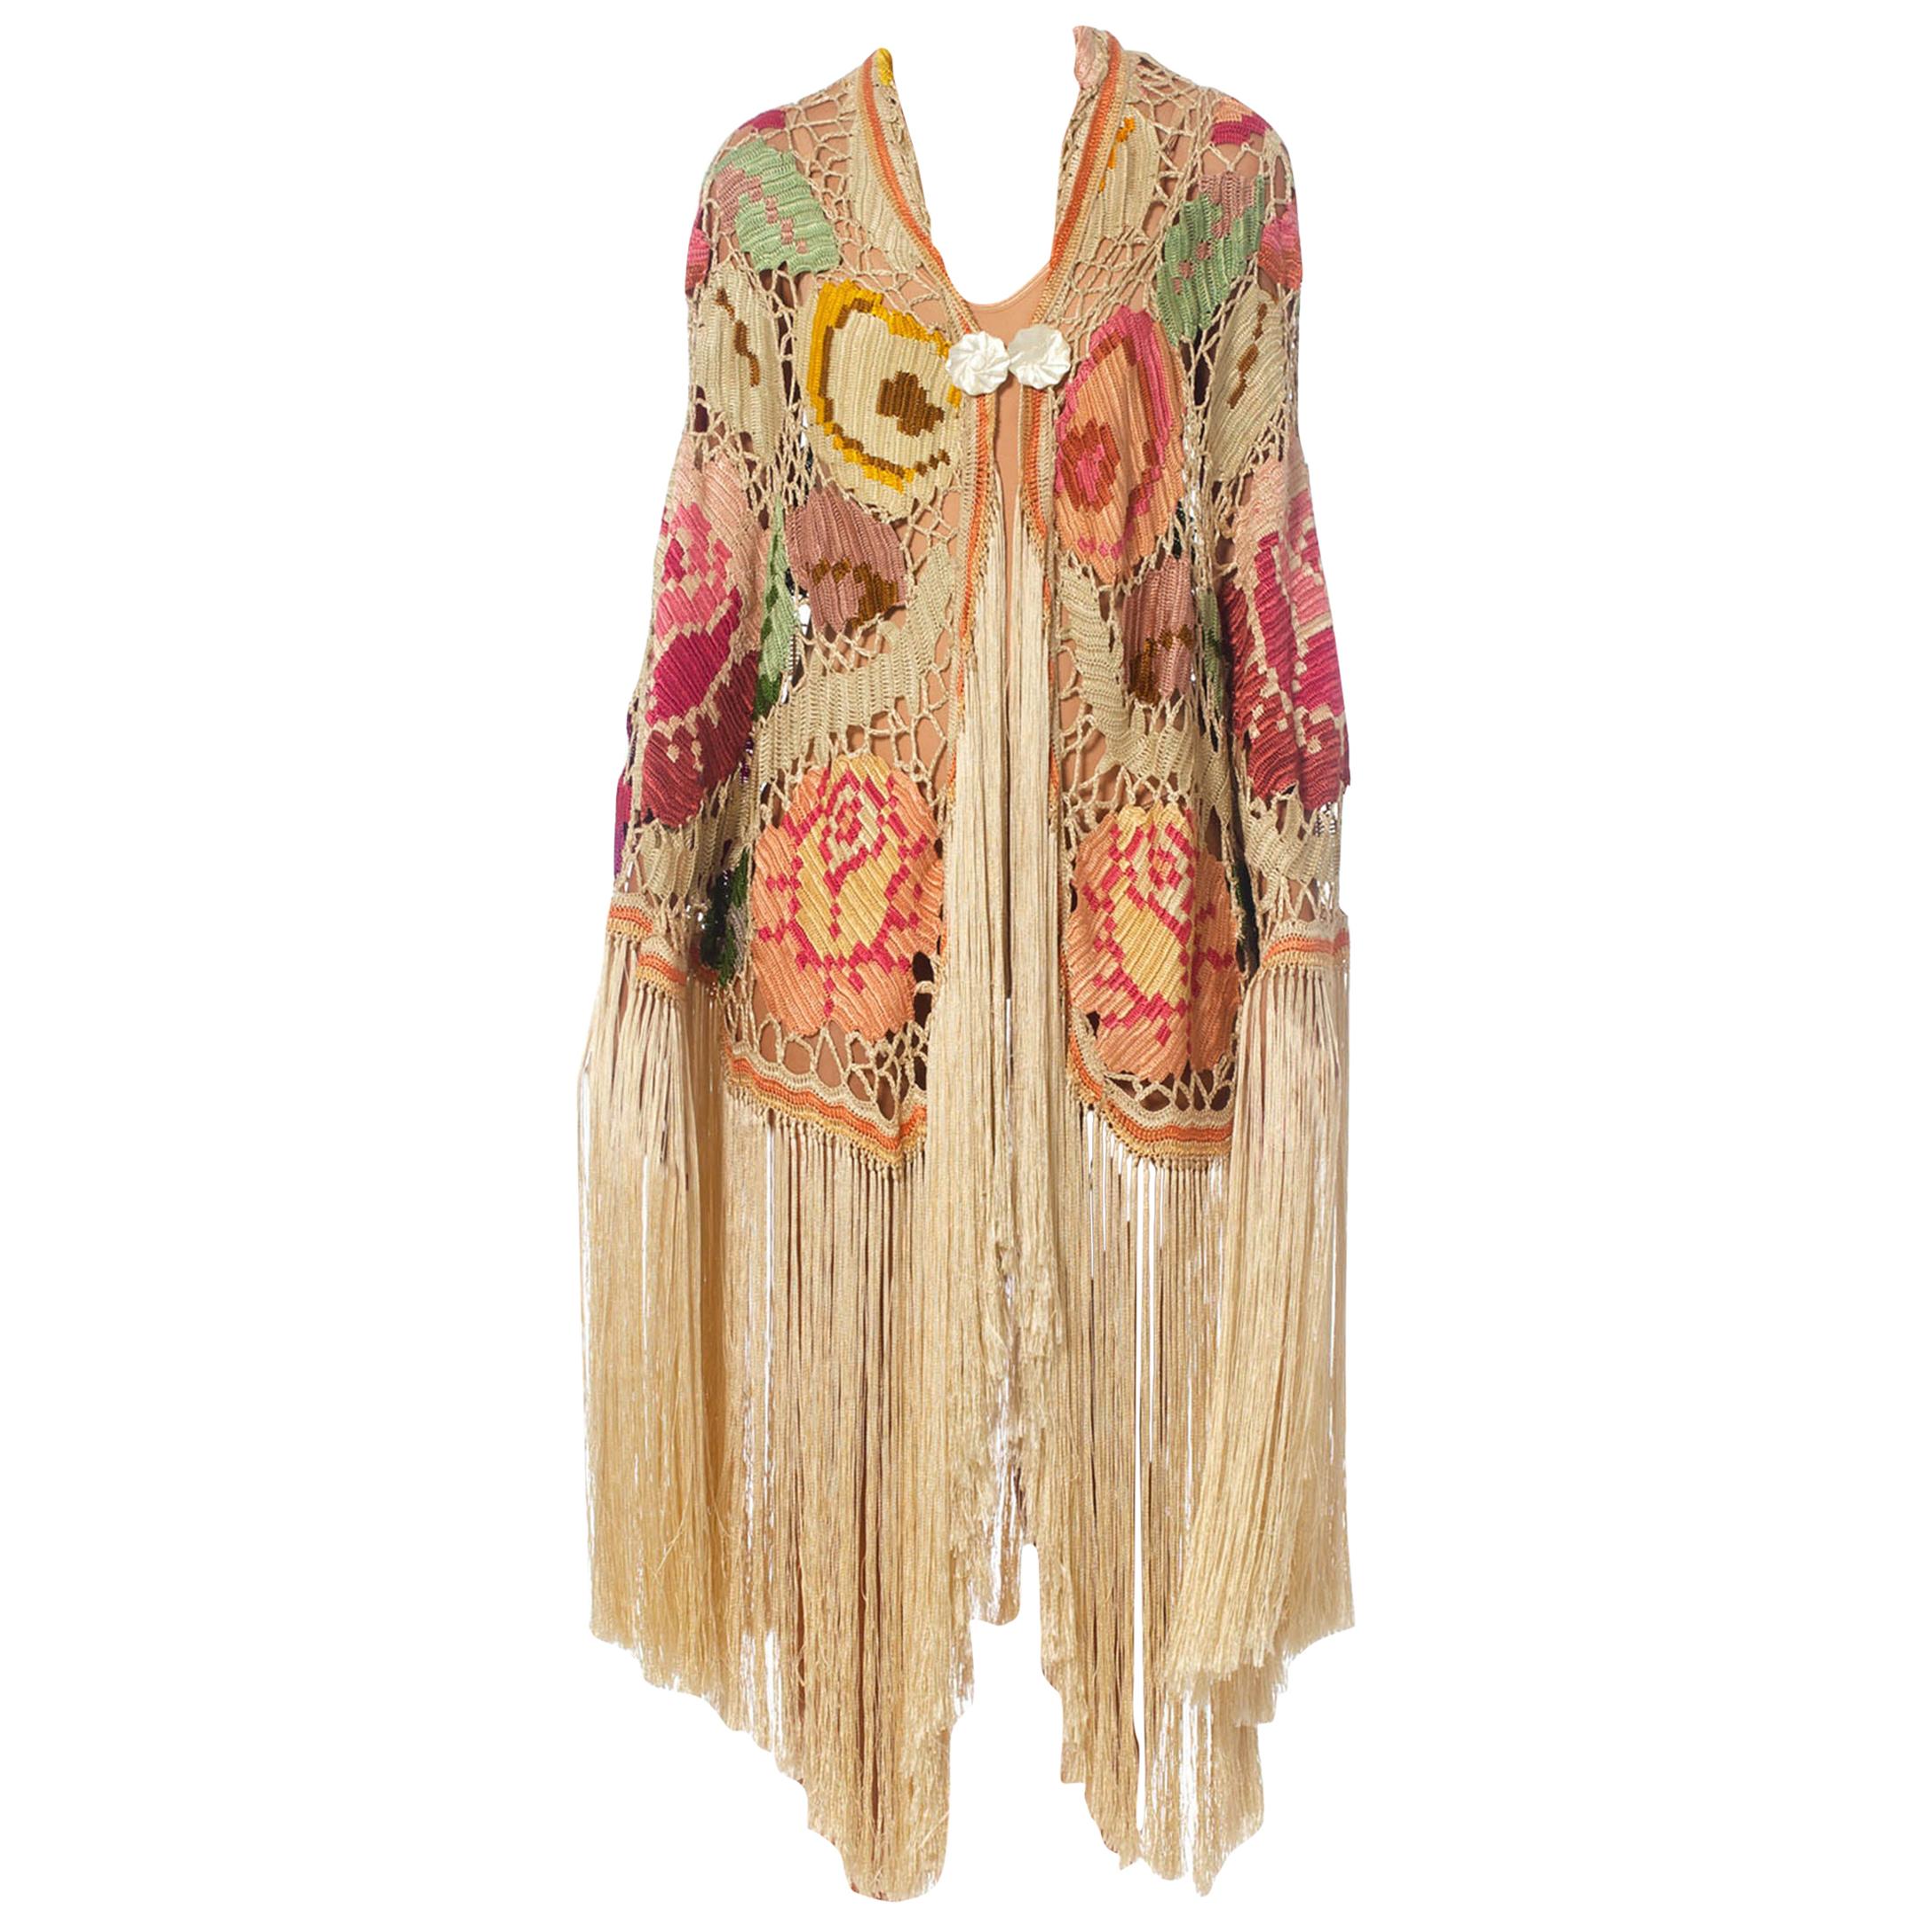 MORPHEW COLLECTION Cream & Pastels Silk Fringe Cocoon Made From An Antique 1920